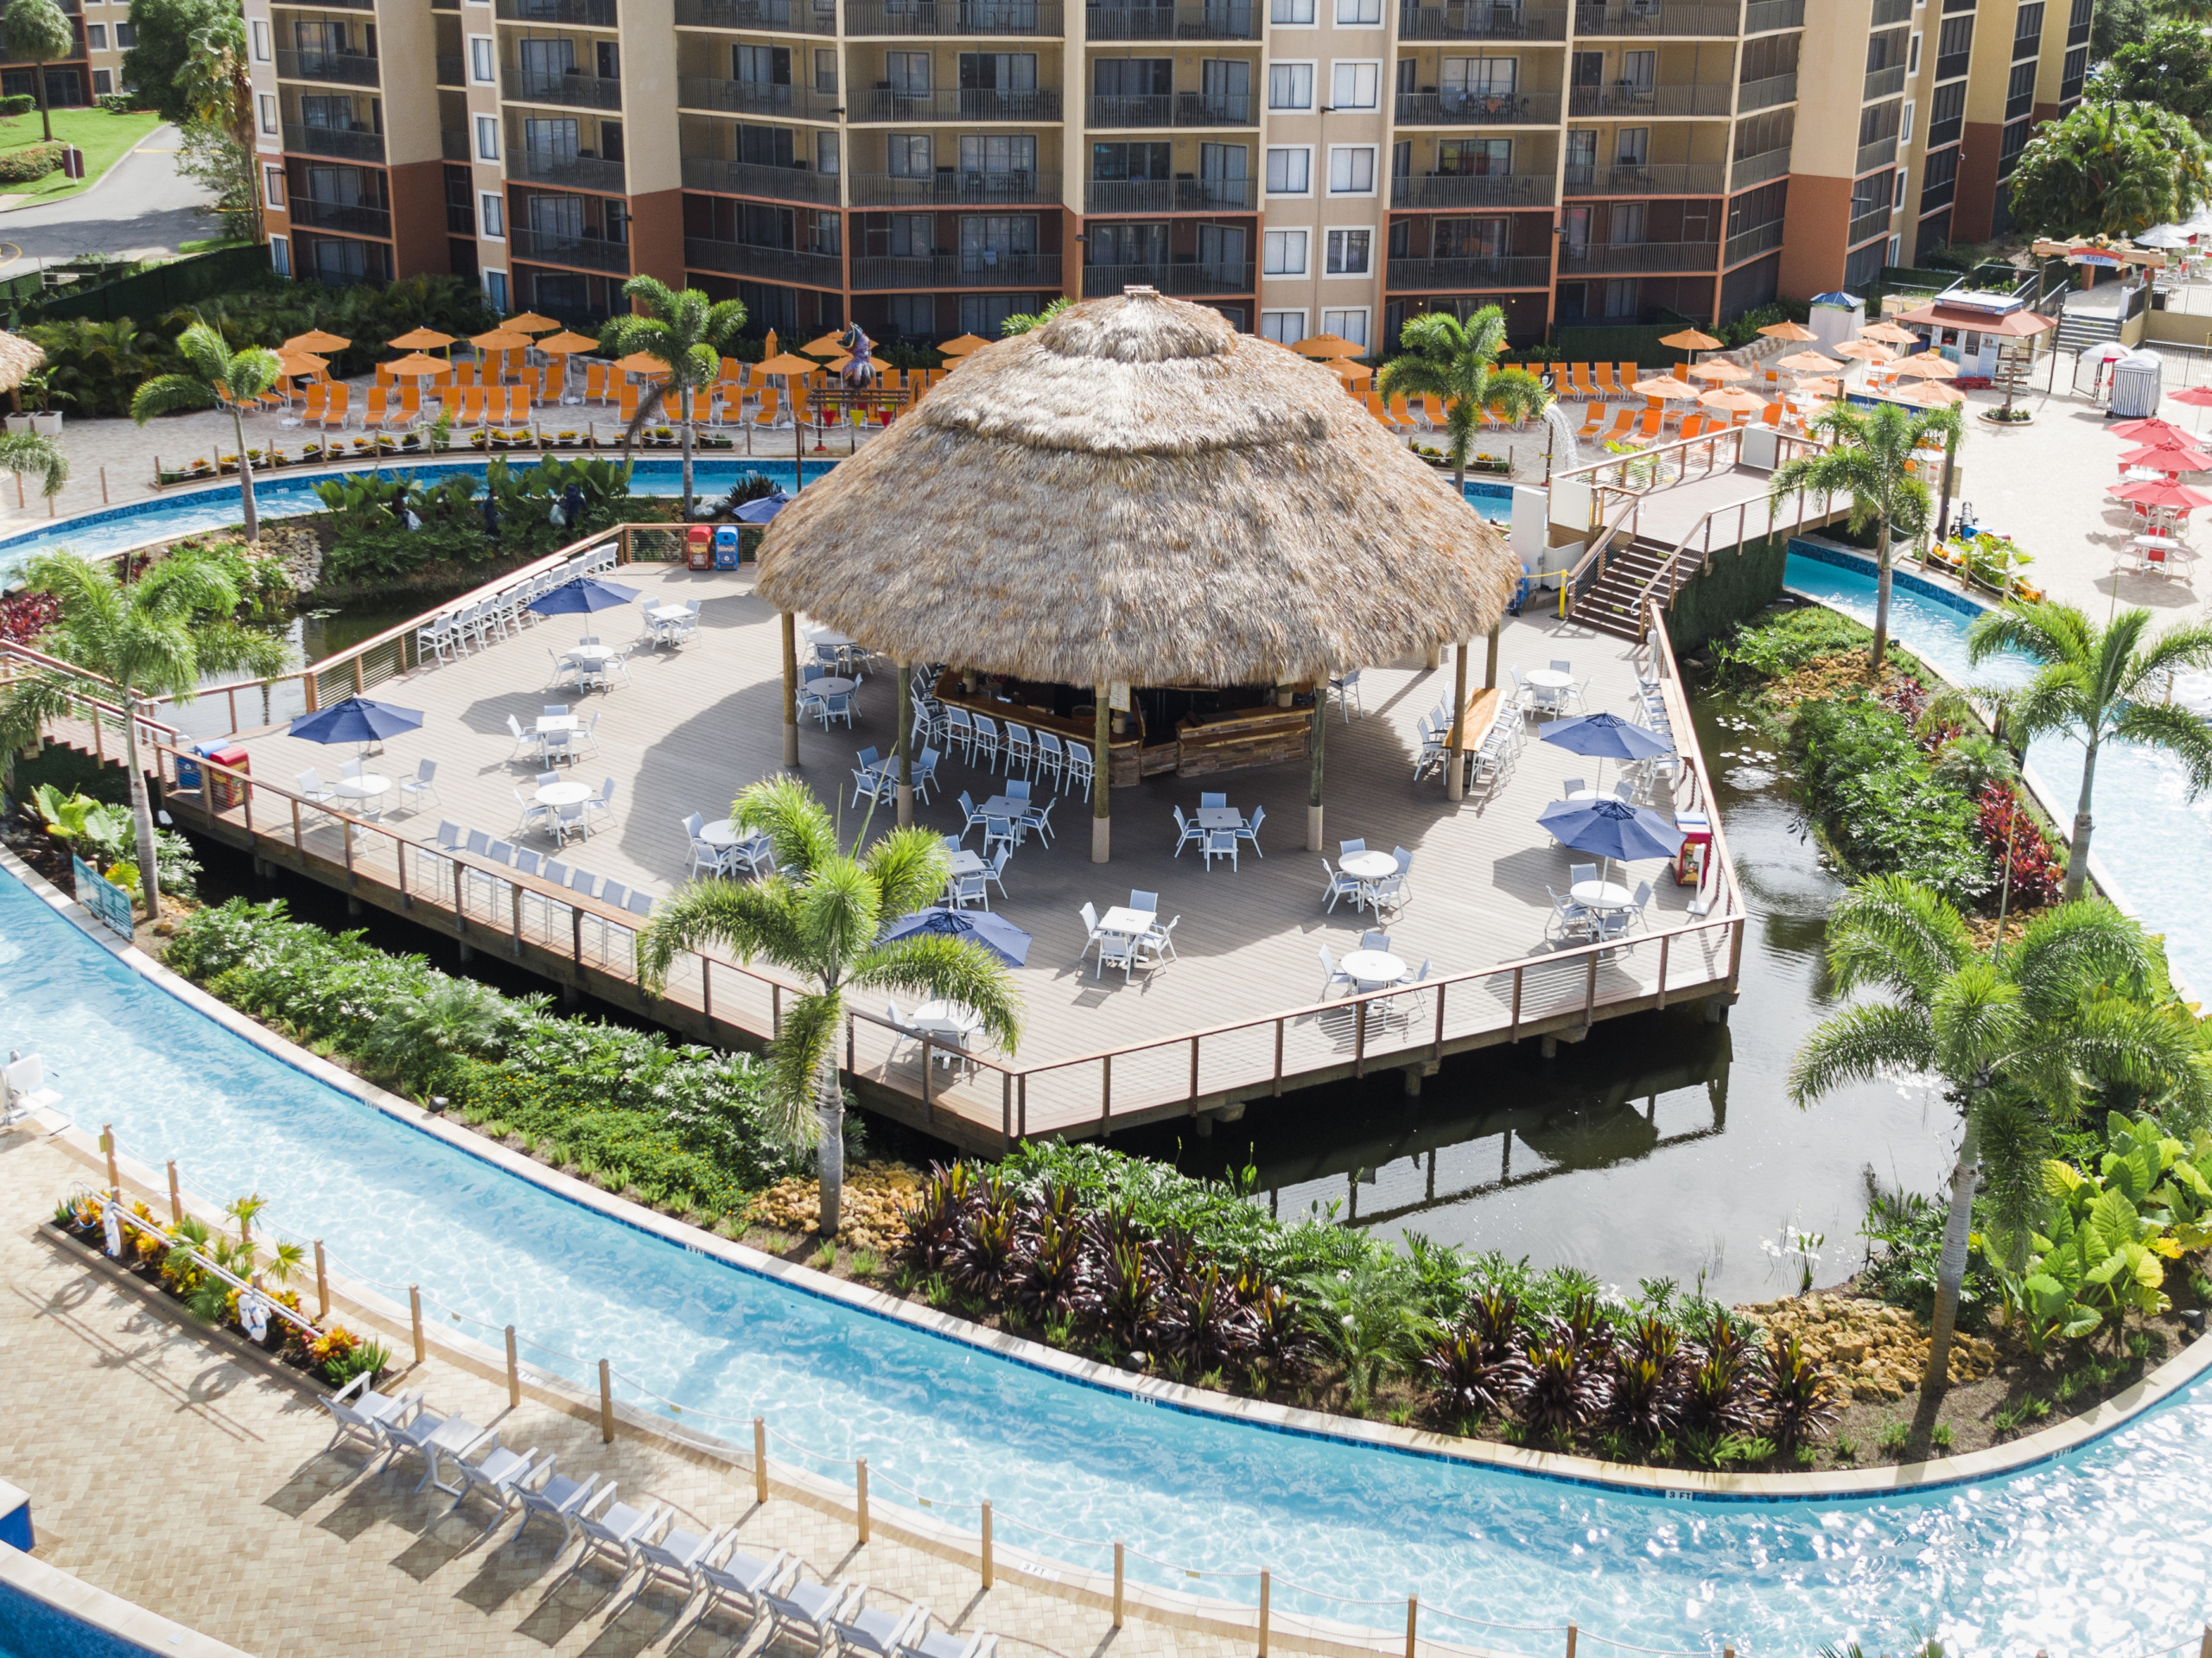 Westgate Lakes Resort & Spa - 4 day/3 Night Orlando Vacation Packages | Westgate Disney Orlando Package $99